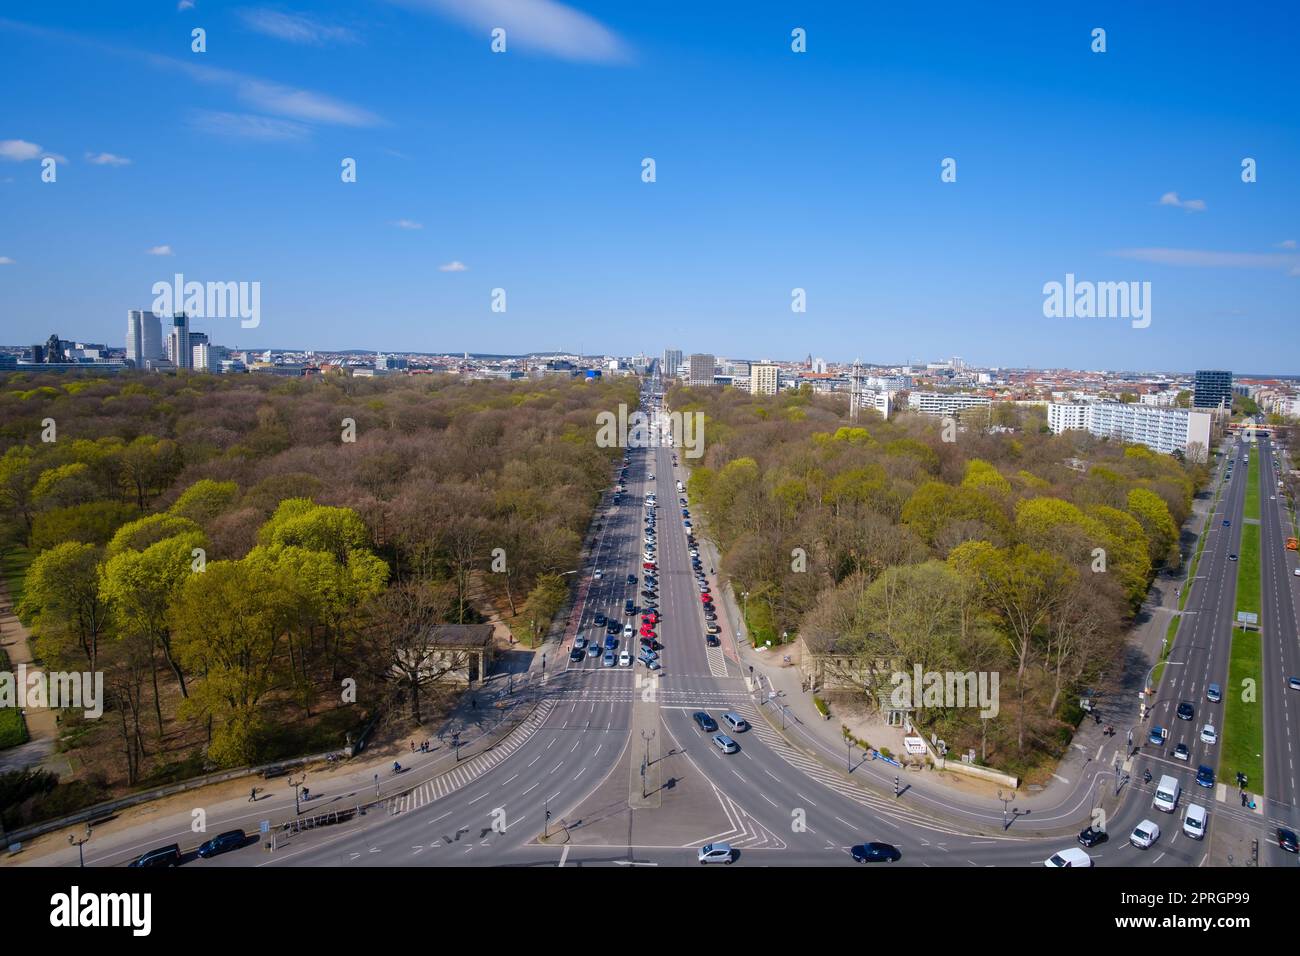 Panoramic view of the Bundesstraße, the federal highway leading to the Brandenburg Gate in Berlin Germany Stock Photo